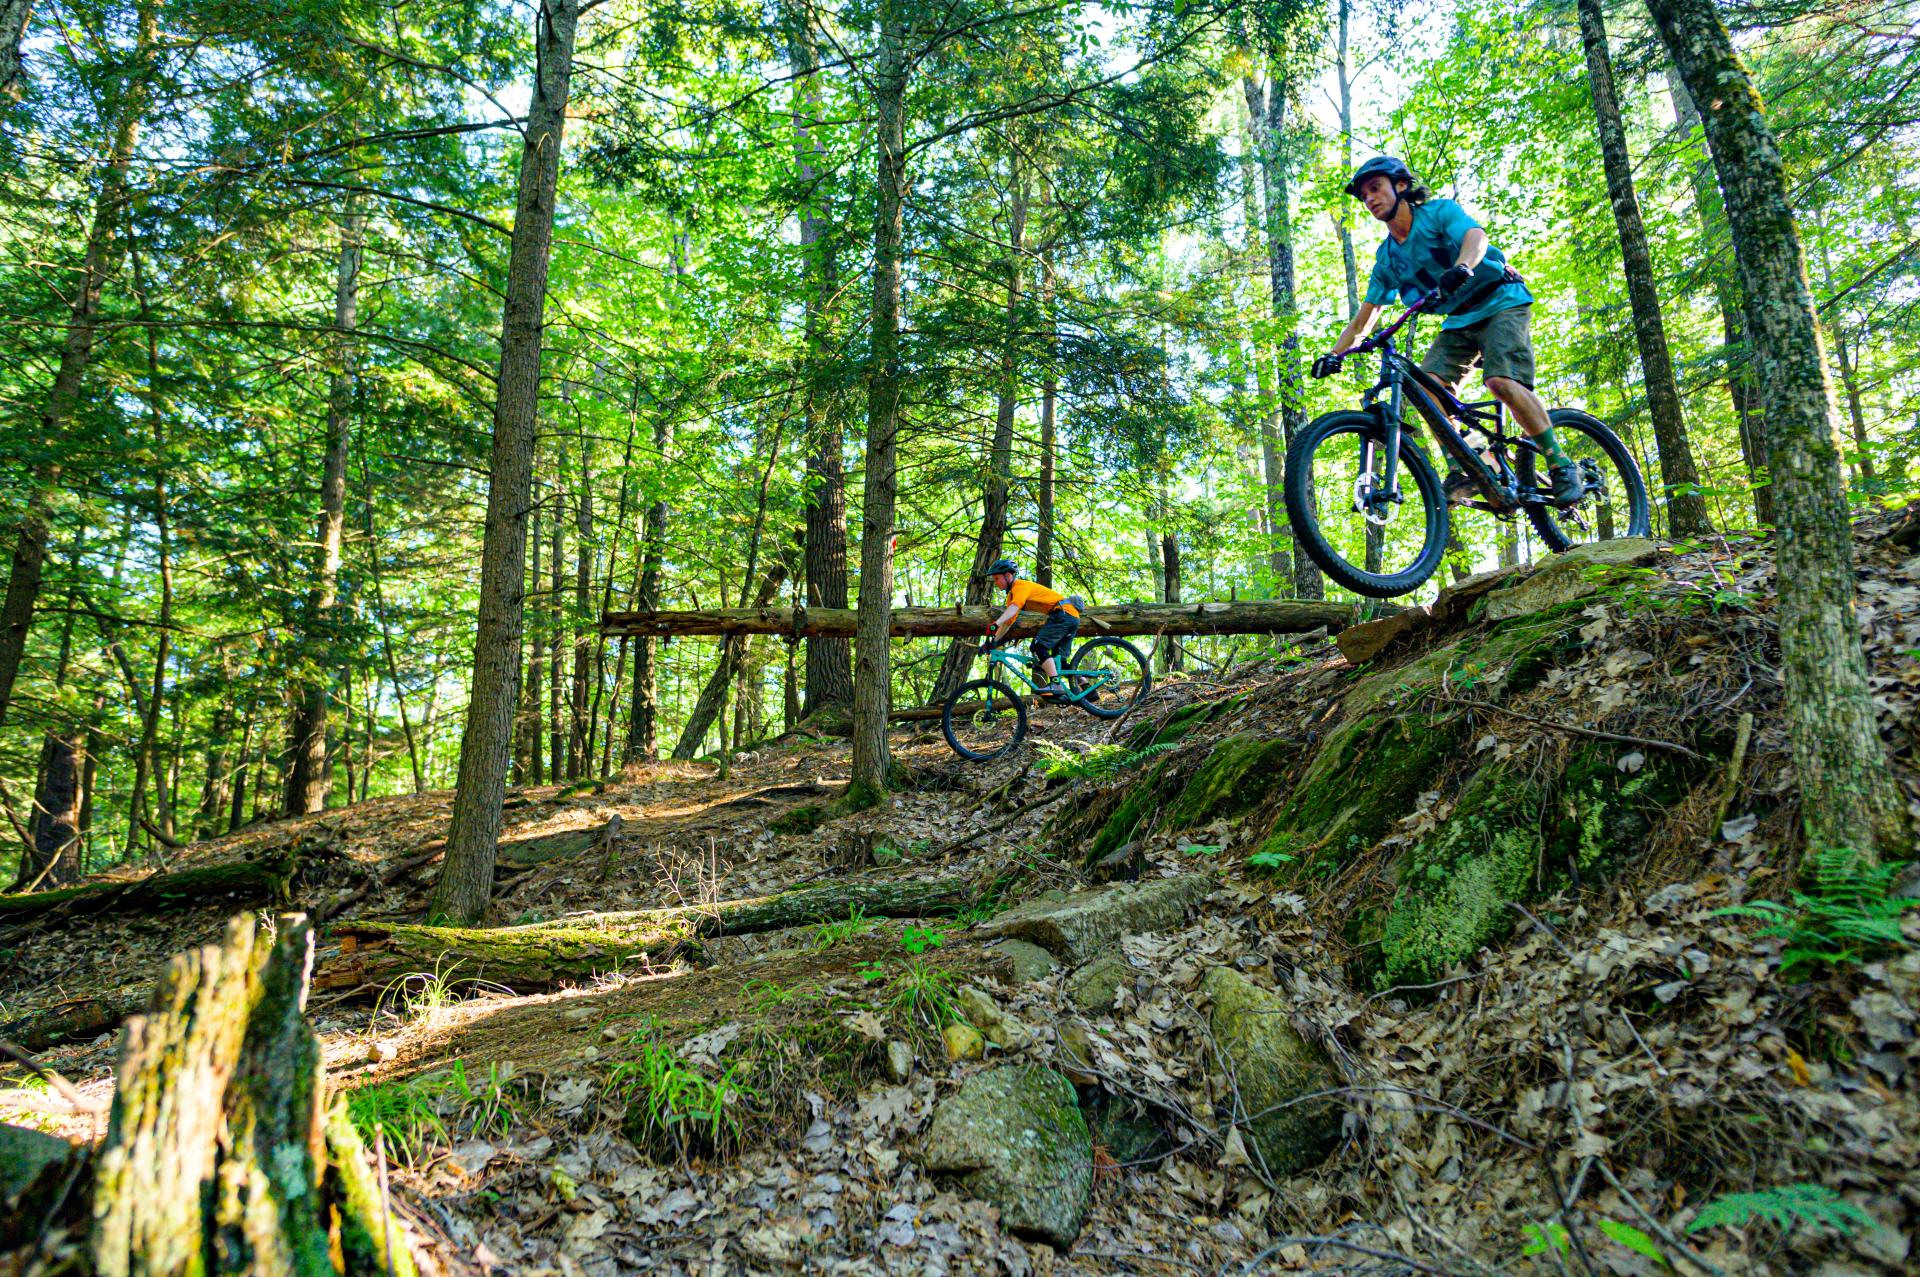 A mountain biker rides down a steep rocky section of trail in the woods